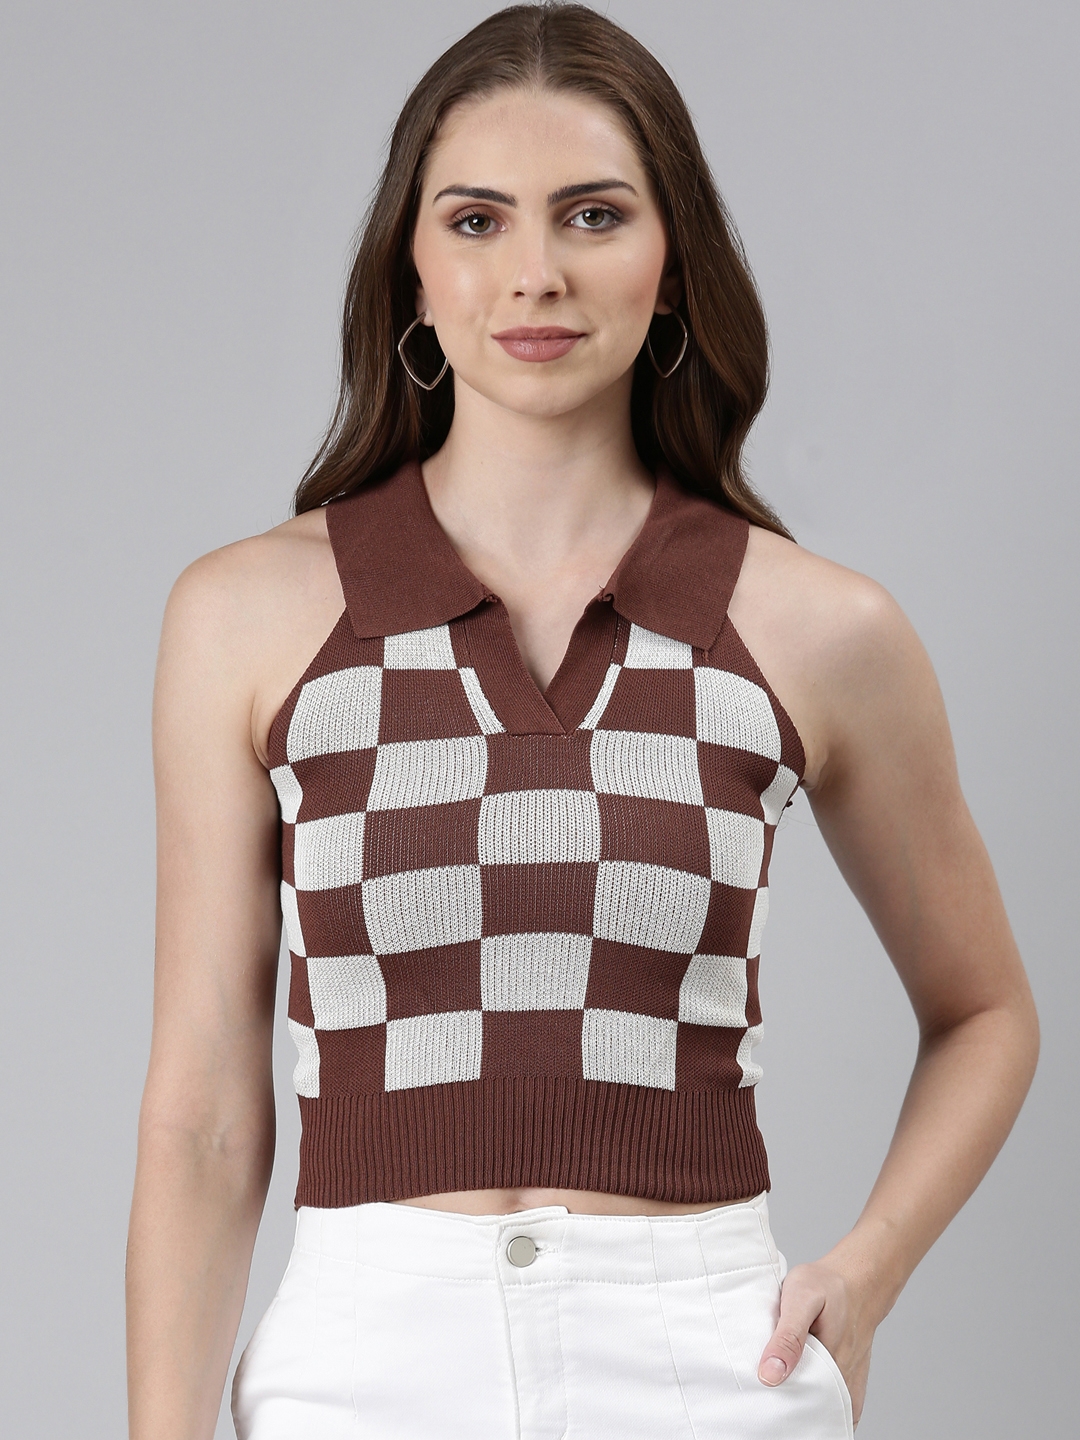 Showoff | SHOWOFF Women's Above the Keyboard Collar Checked Coffee Brown Cinched Waist Crop Top 1